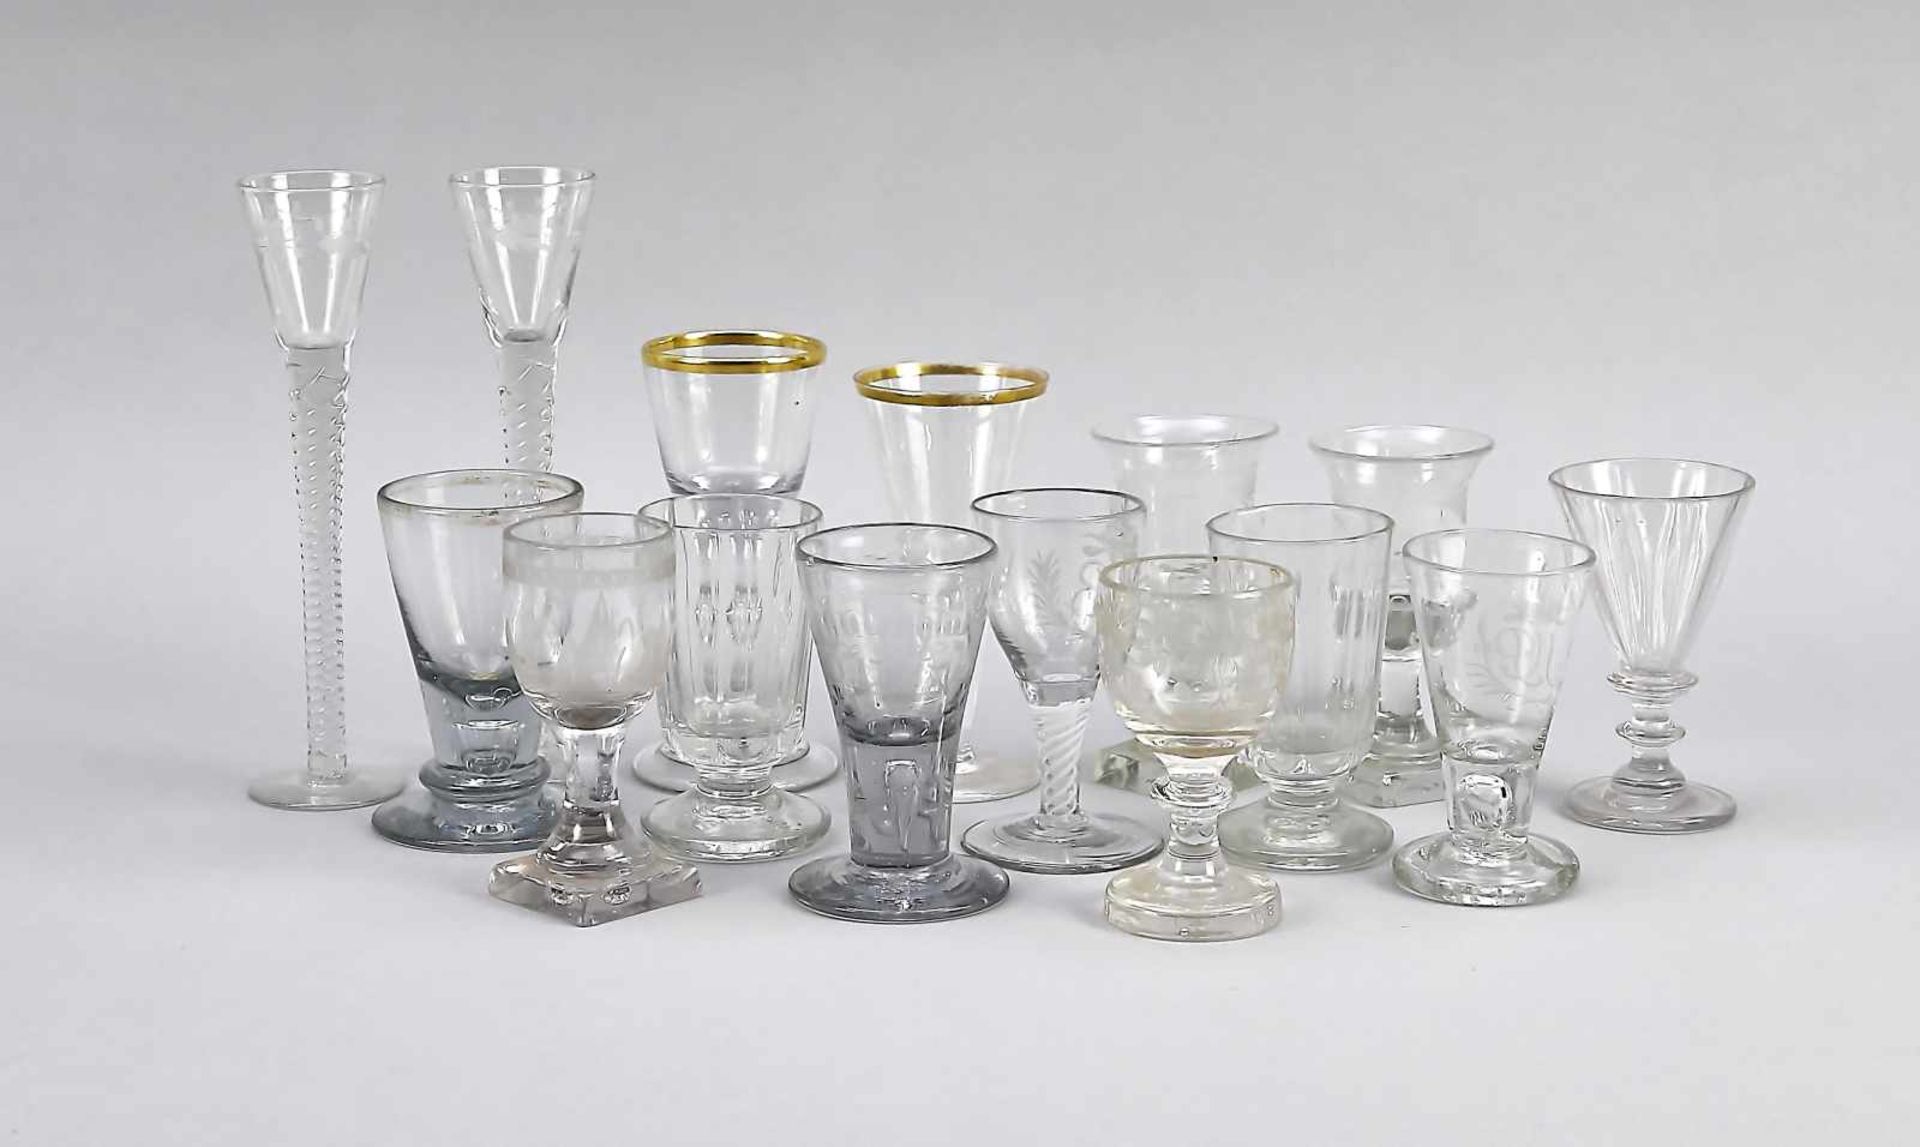 15 goblets, 18th/19th cent., different shapes and sizes, clear glass, 2 with gold rim